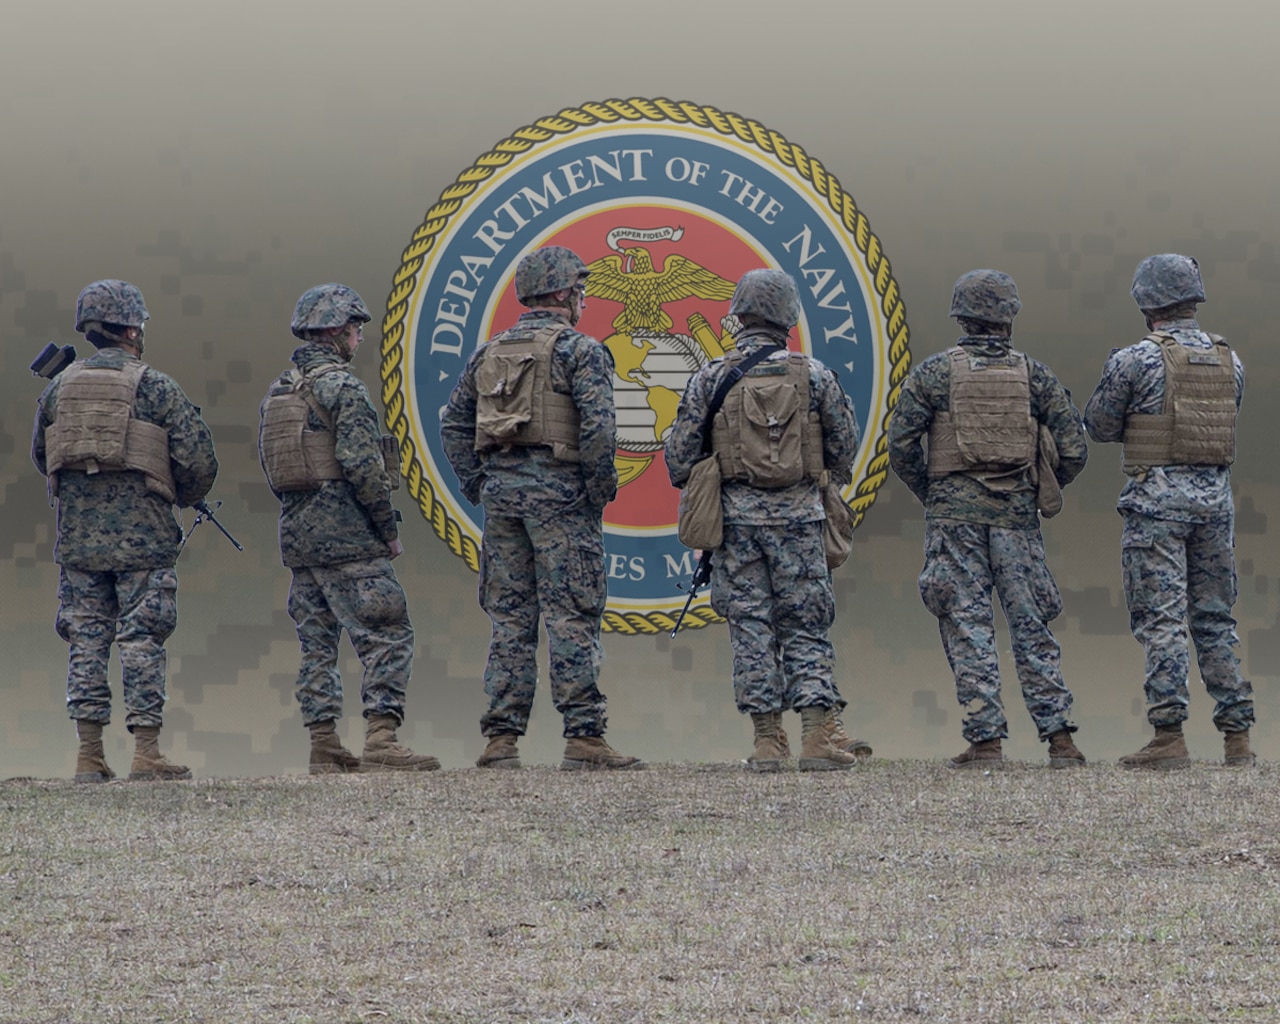 From fire team to Marine Corps — an interactive look at the Marine Corps’ organizational structure.